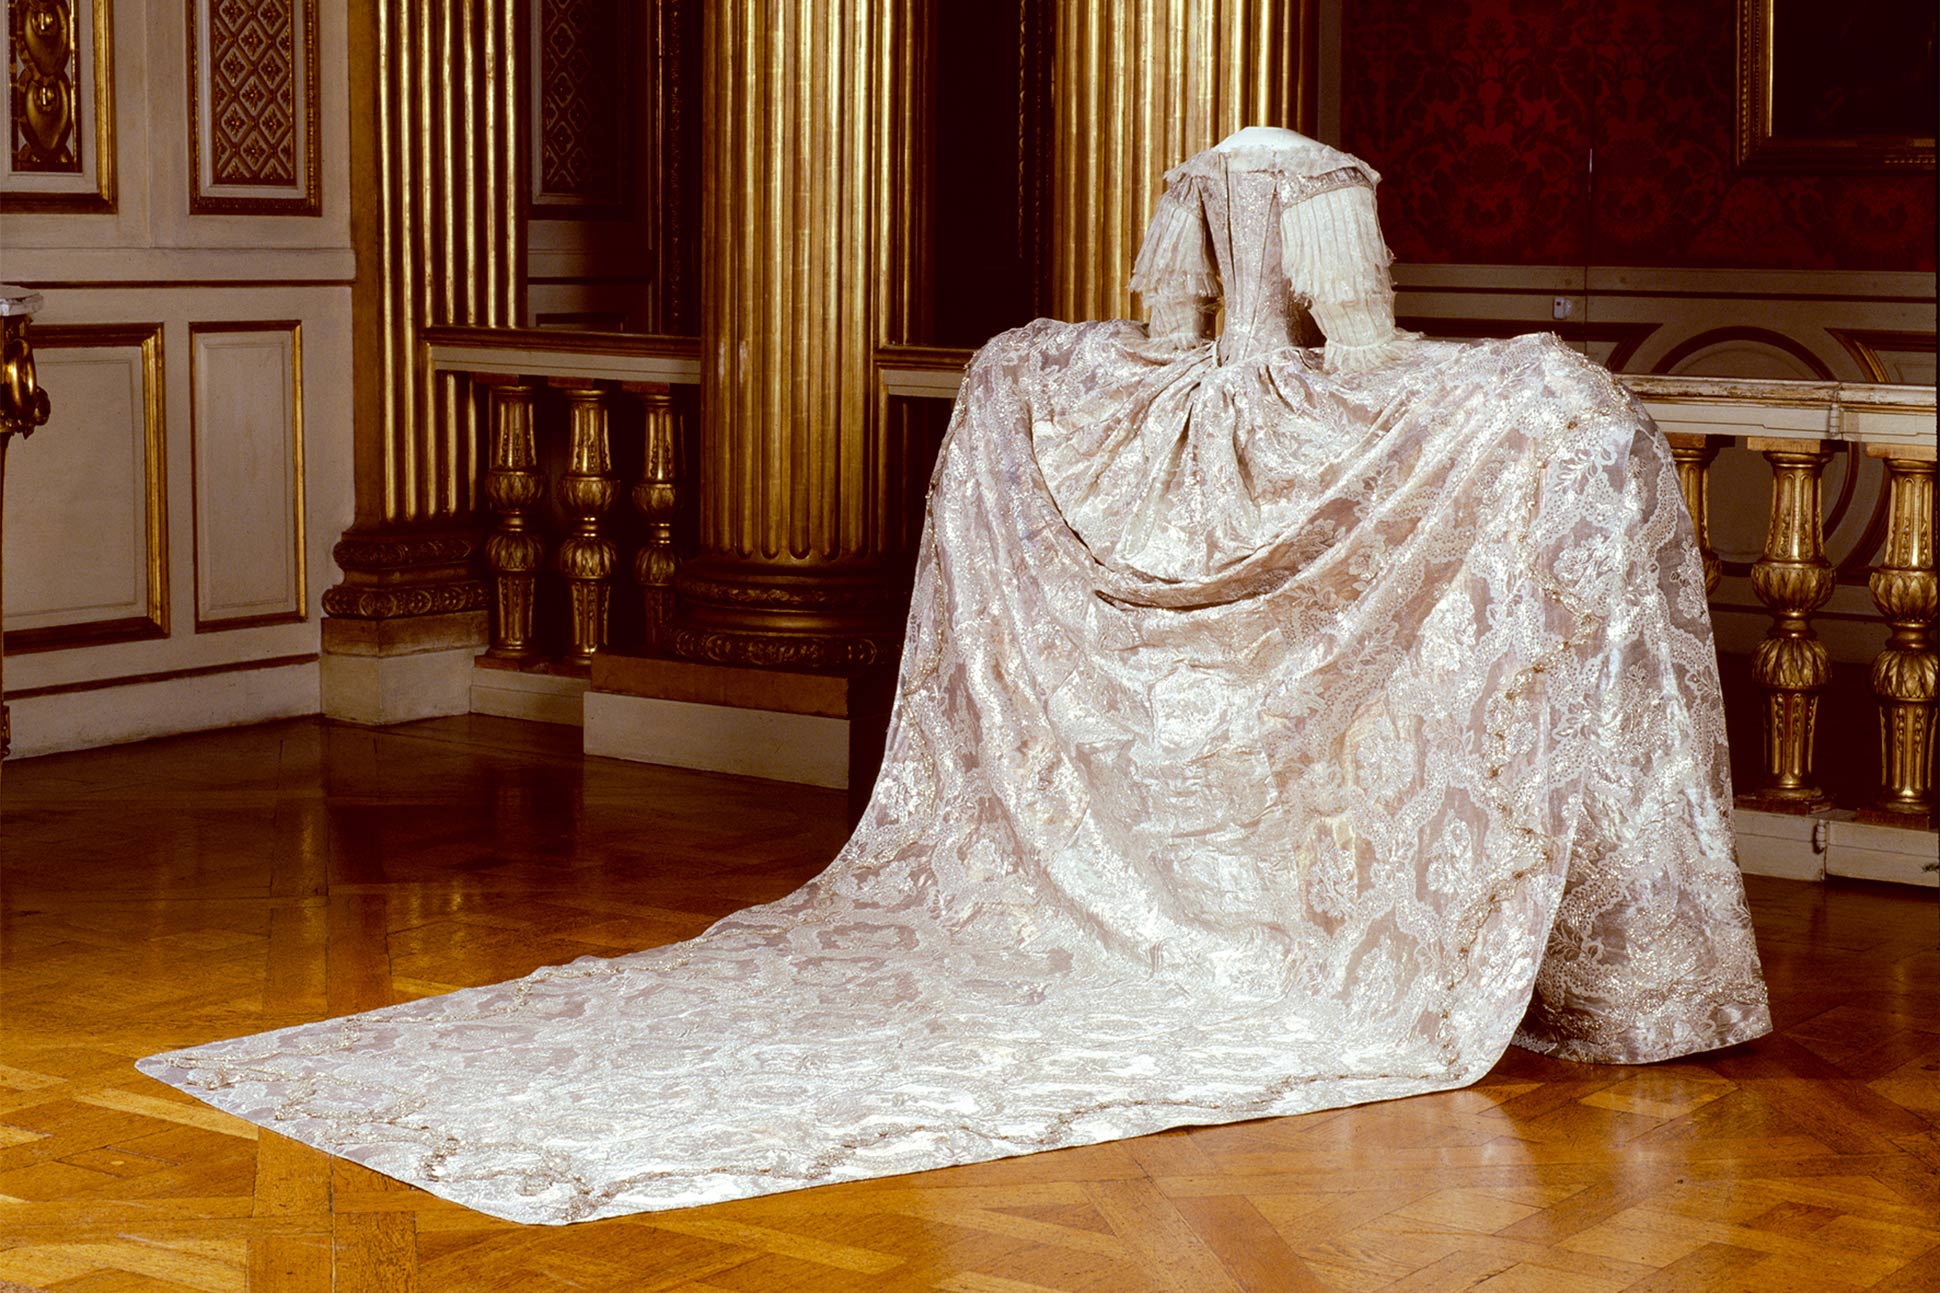 Sofia Magdalena's wedding gown at the Royal Armoury in the Swedish Royal Palace, Stockholm, Sweden